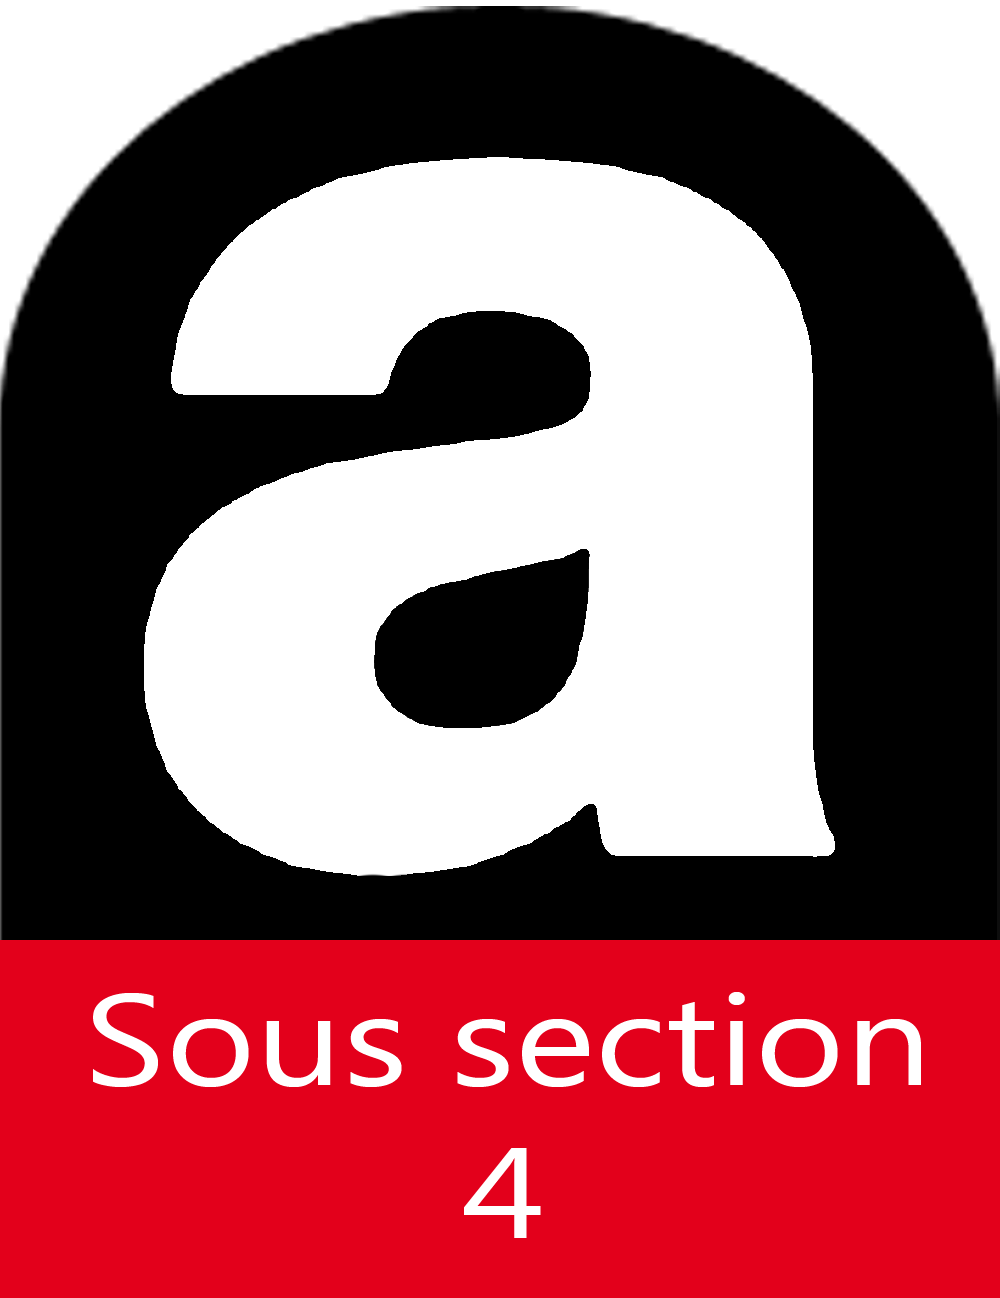 Icone-sous-section4